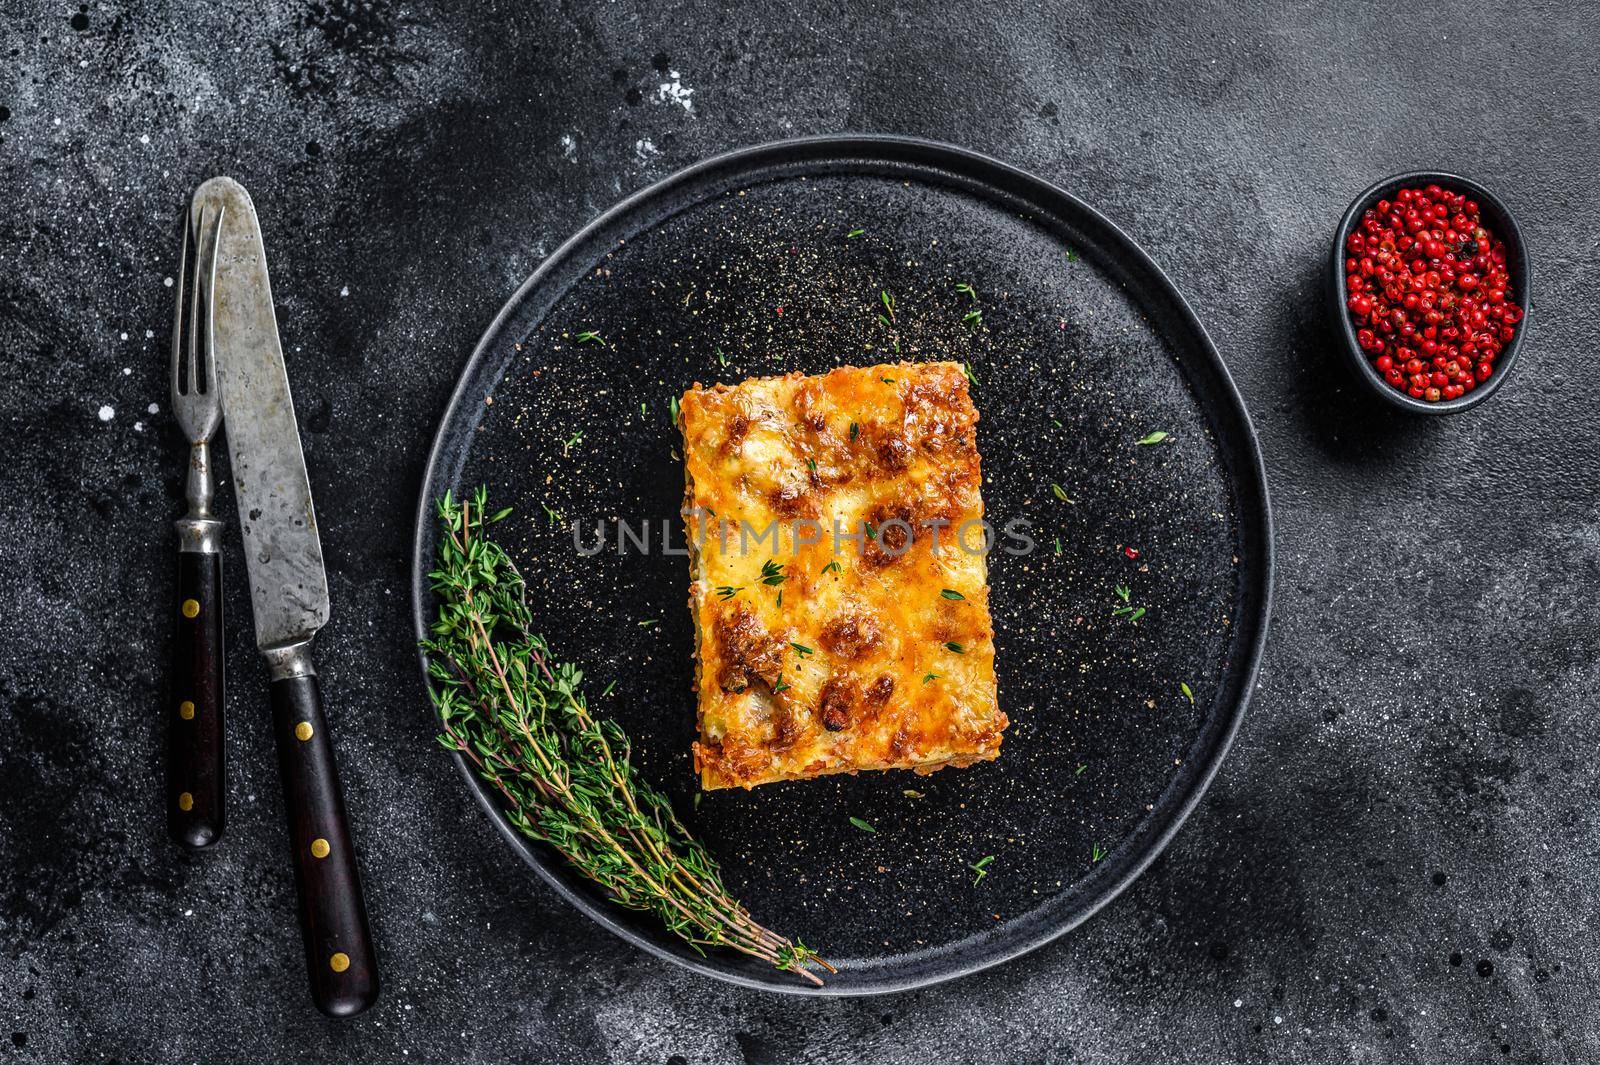 Lasagna with mince beef meat and tomato bolognese sauce on a plate. Black background. Top view.